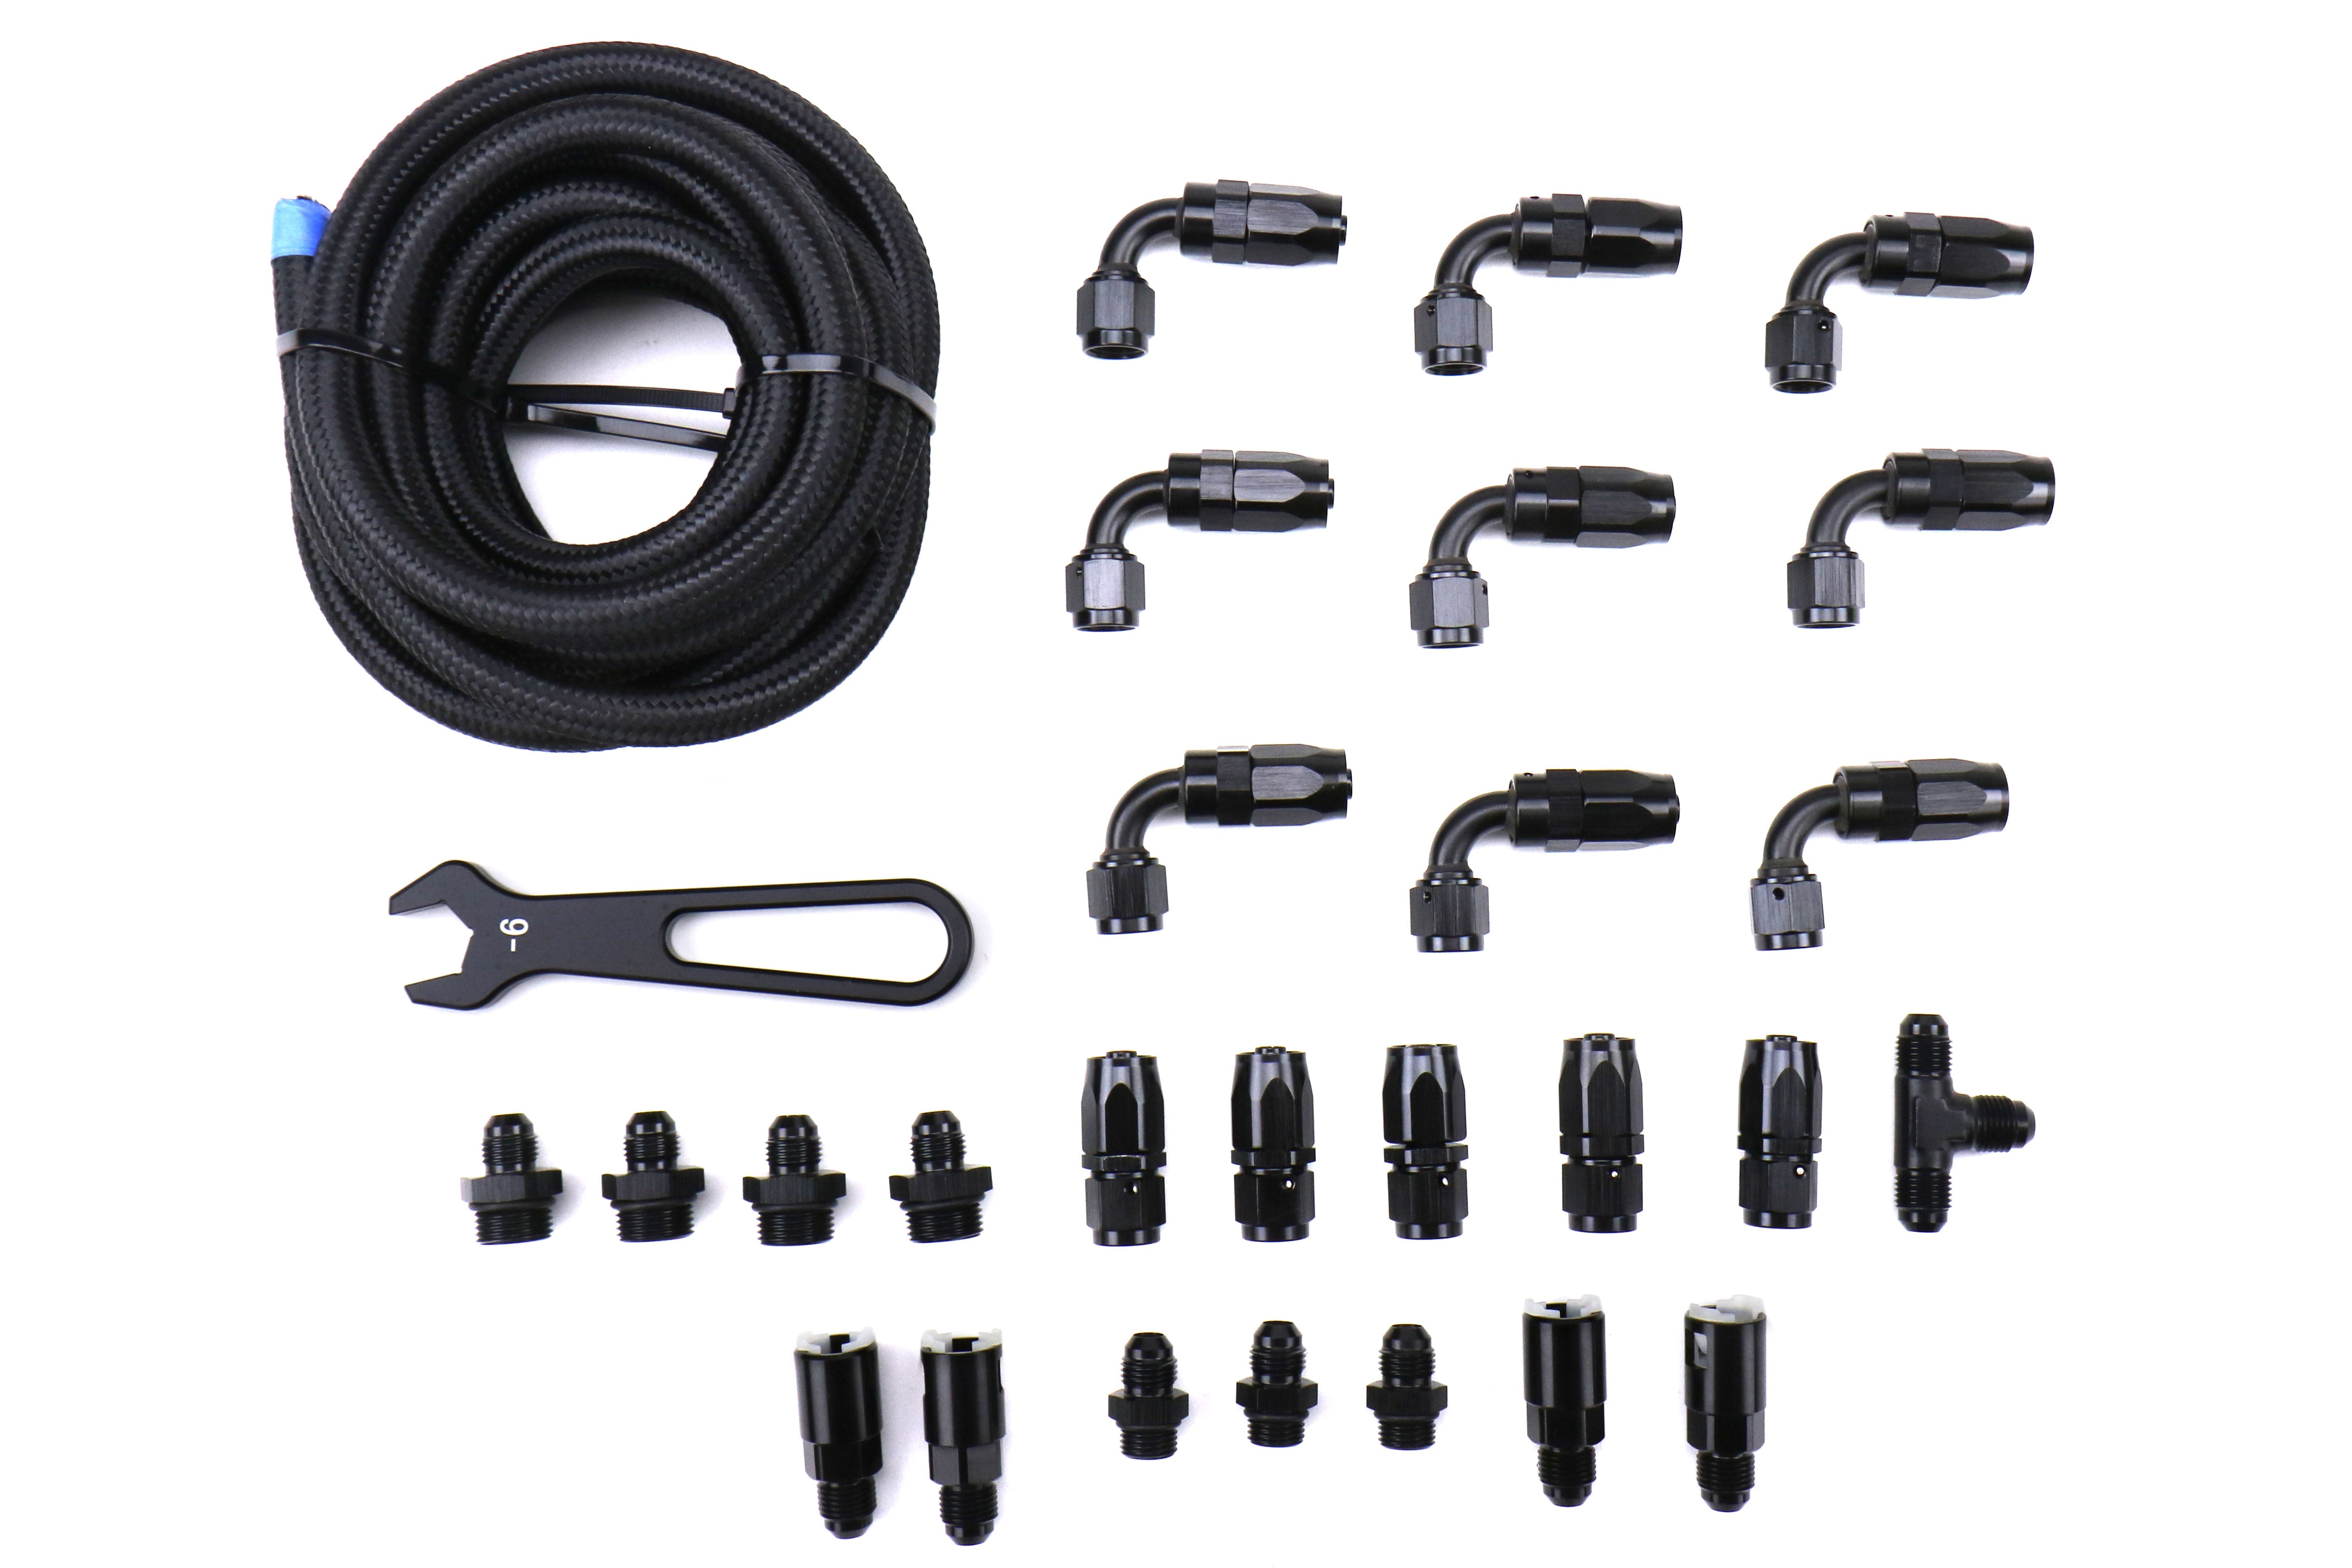 Torque Solution Braided Fuel Line Kit for 6 FPR and Cobb Flex Fuel